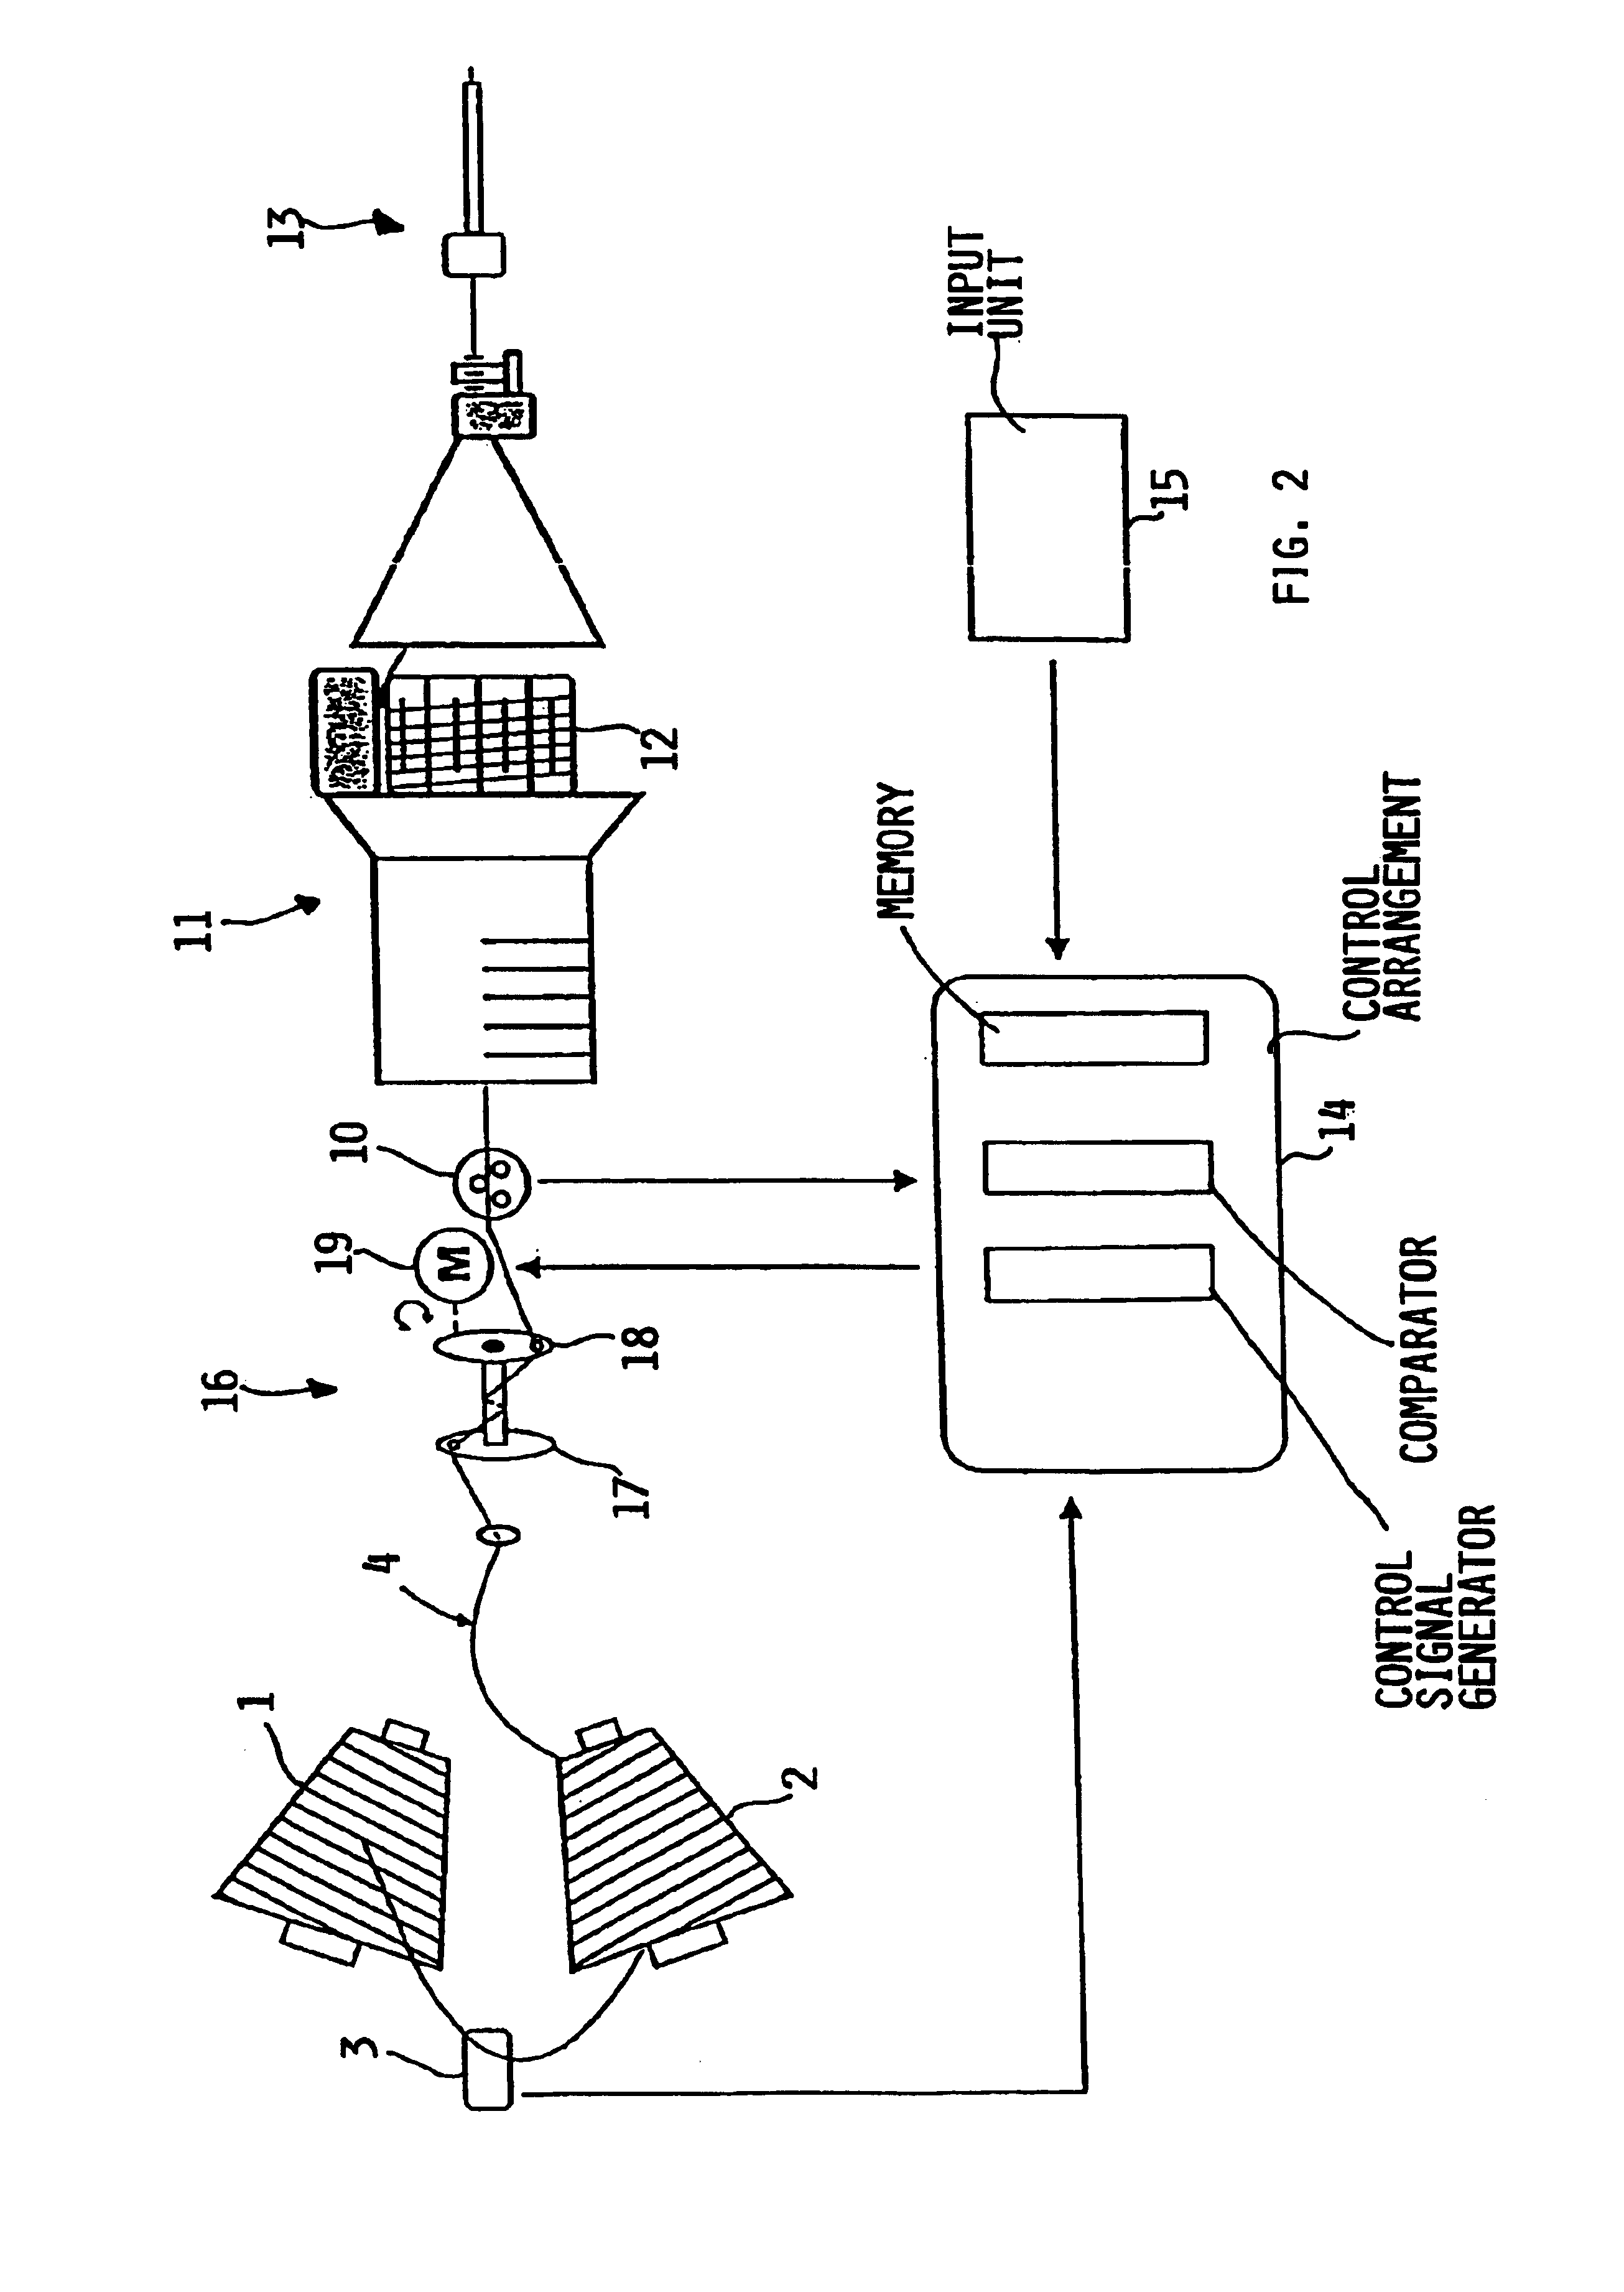 Method and apparatus for variably braking the weft thread between a supply spool and a thread store in a loom